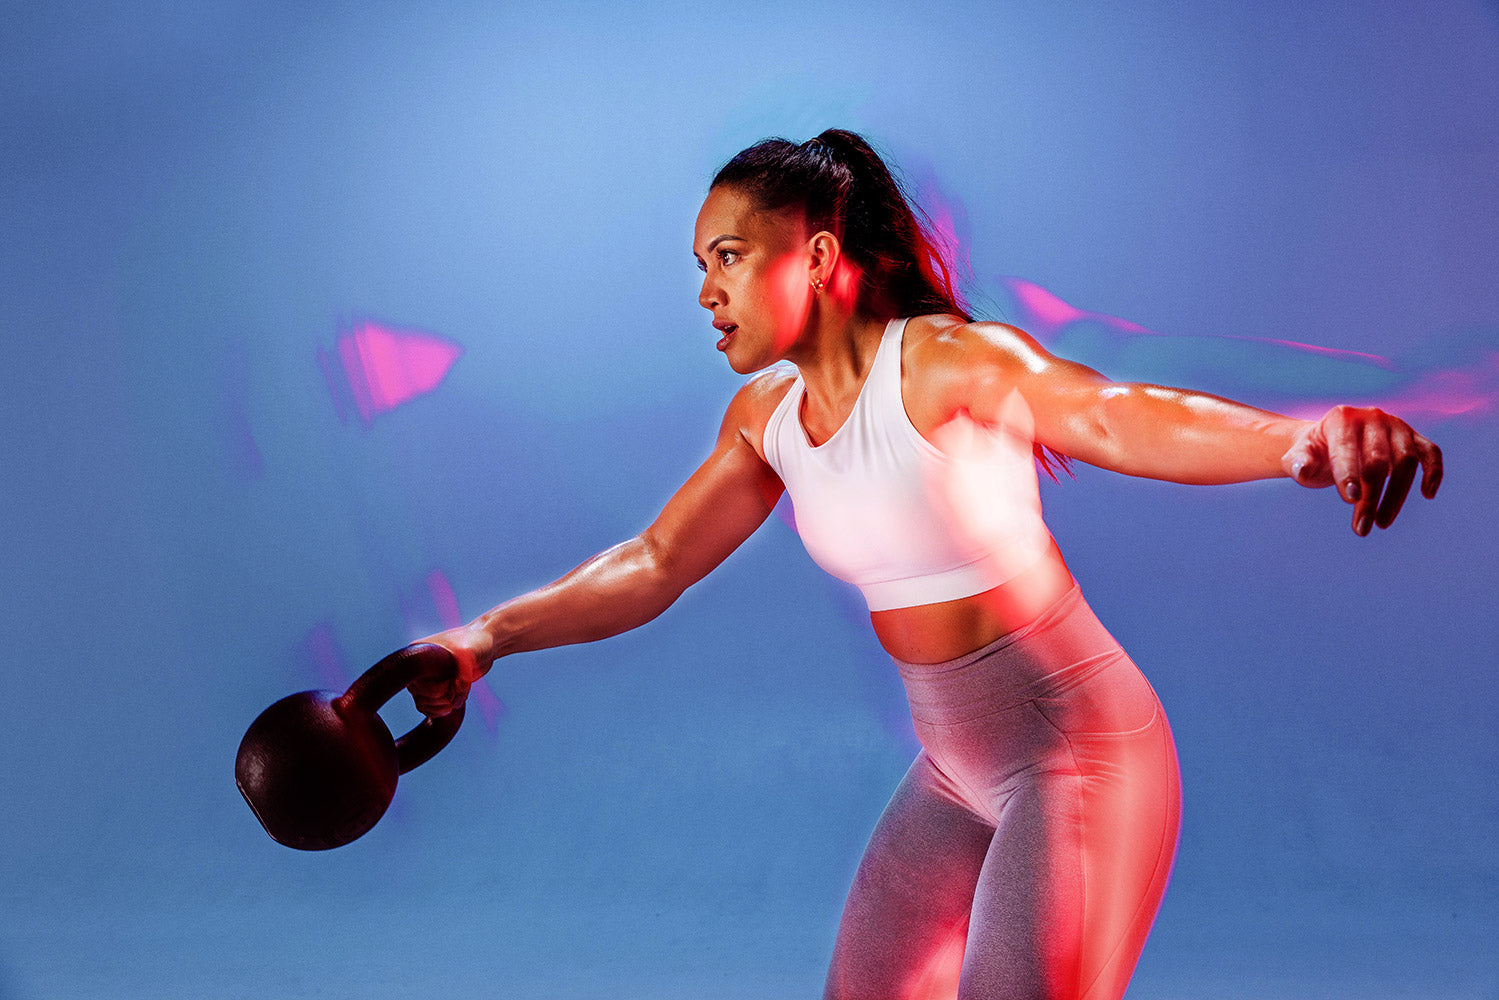 Exercising with kettle bells